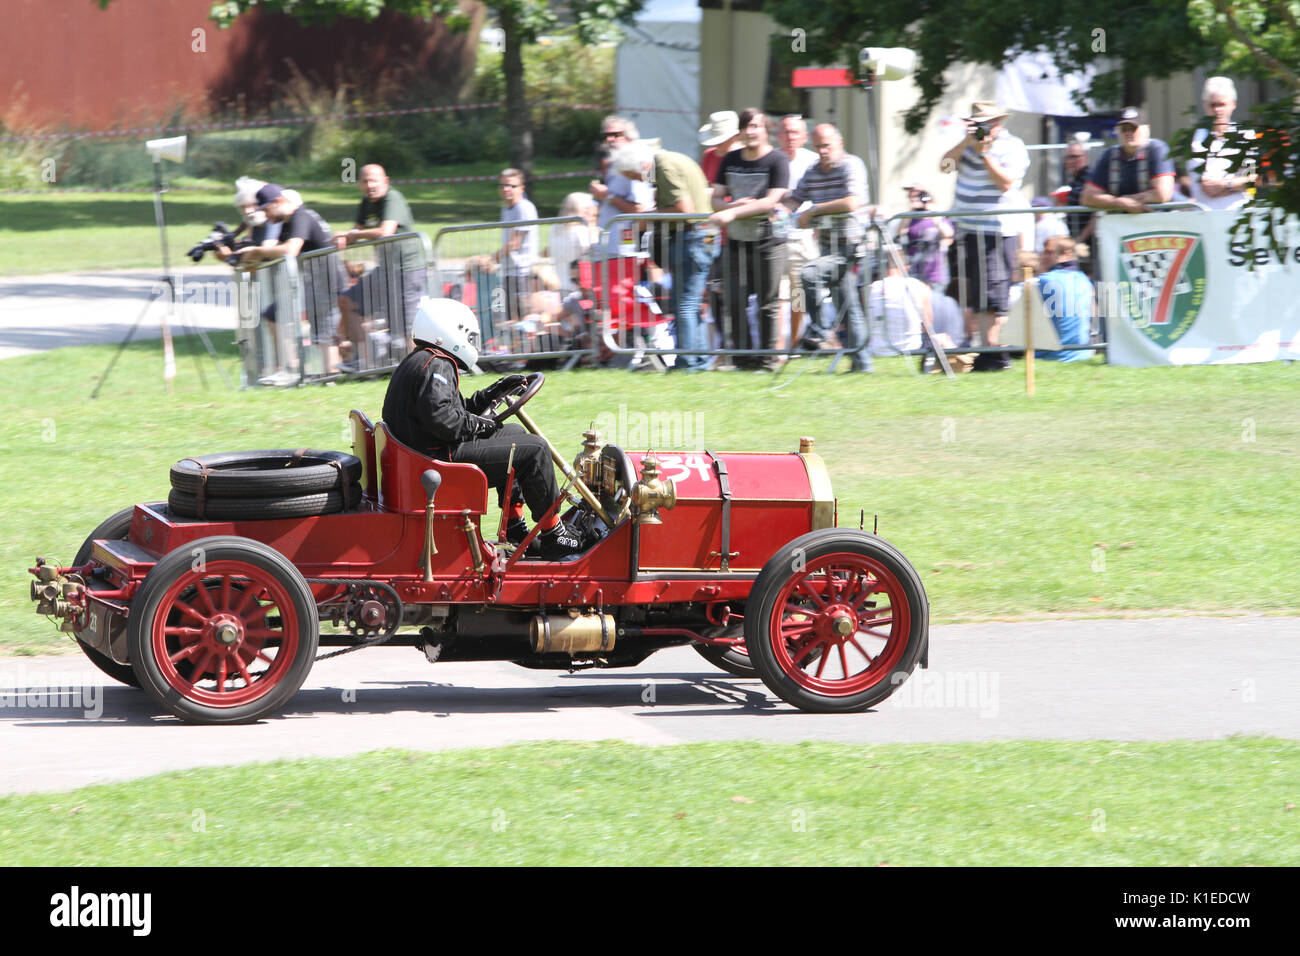 London, UK. 27th August, 2017. 1906 Bianchi competing in the time trials at Motorsport at the Palace in South London England 27 08 2017 Credit: theodore liasi/Alamy Live News Stock Photo